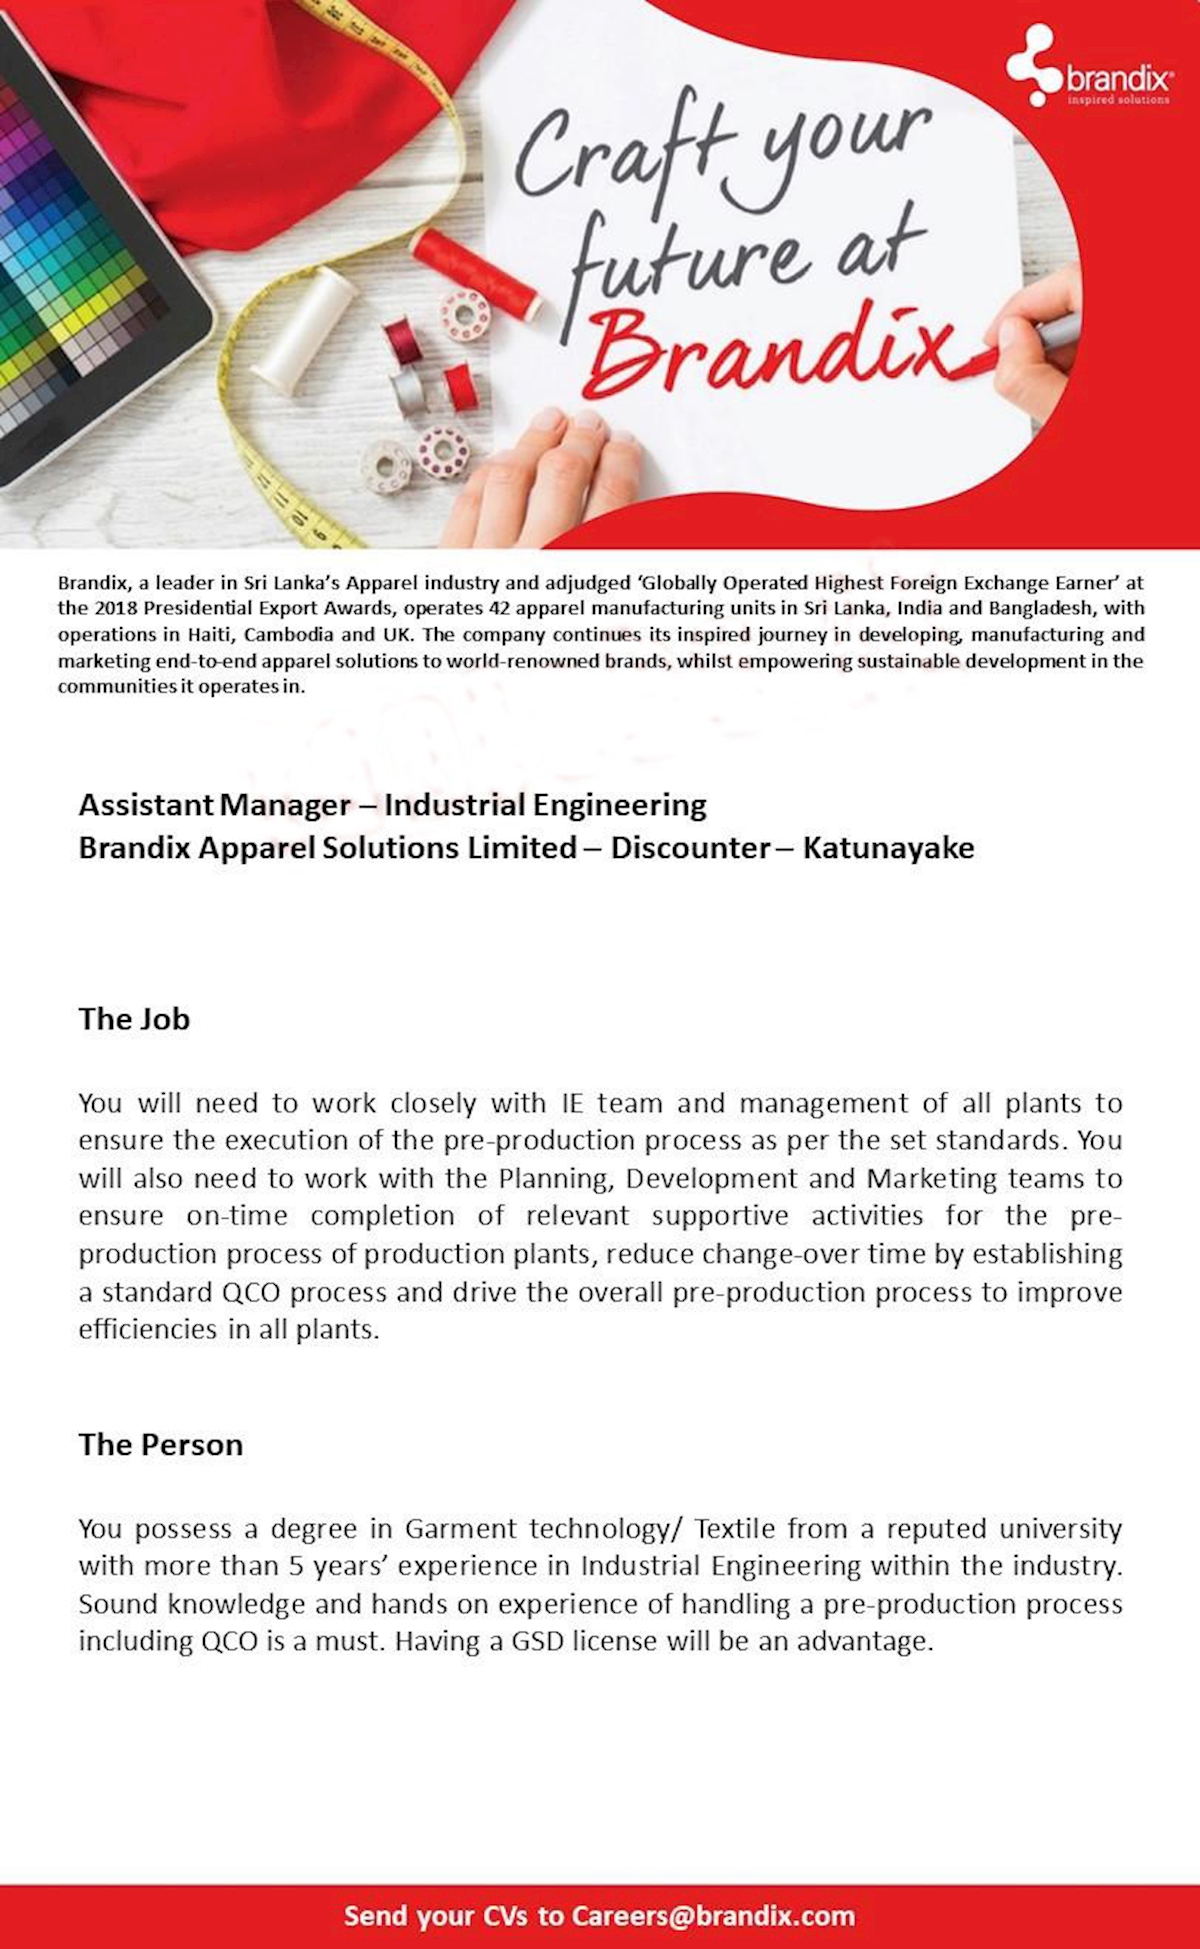 Assistant Manager - Industrial Engineering 